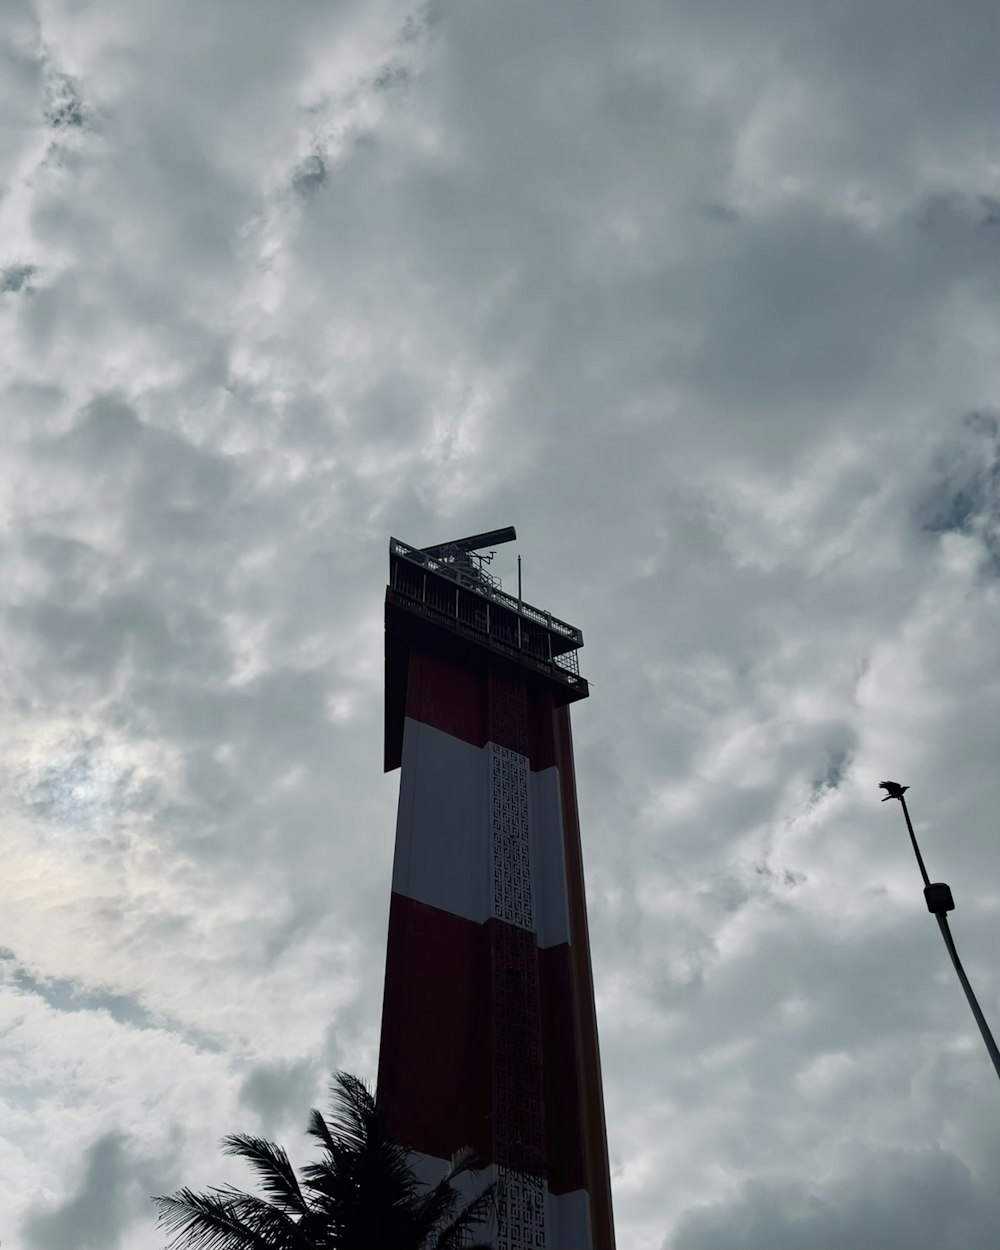 a tall red and white tower under a cloudy sky